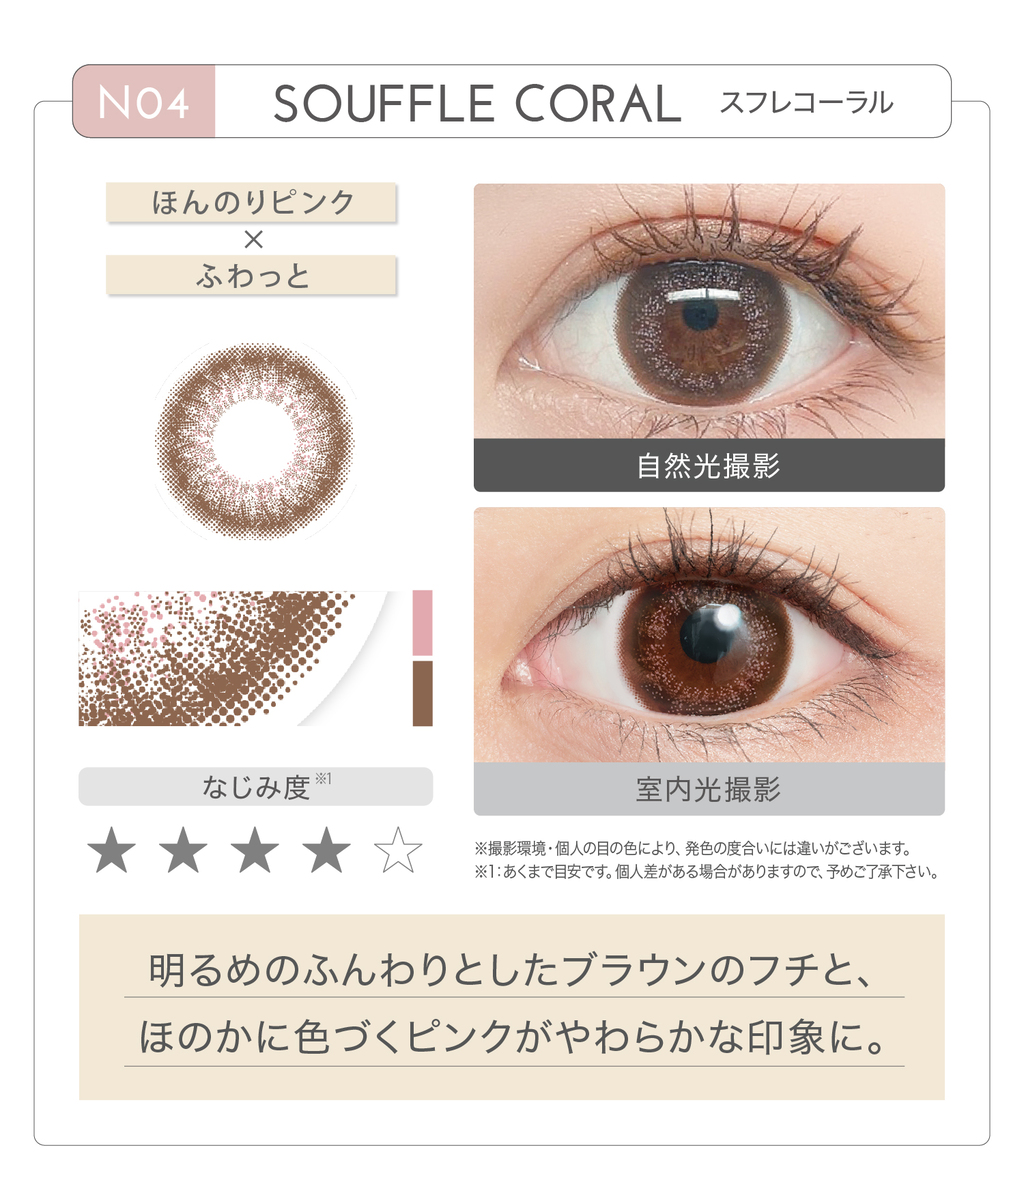 SOUFFLE CORAL